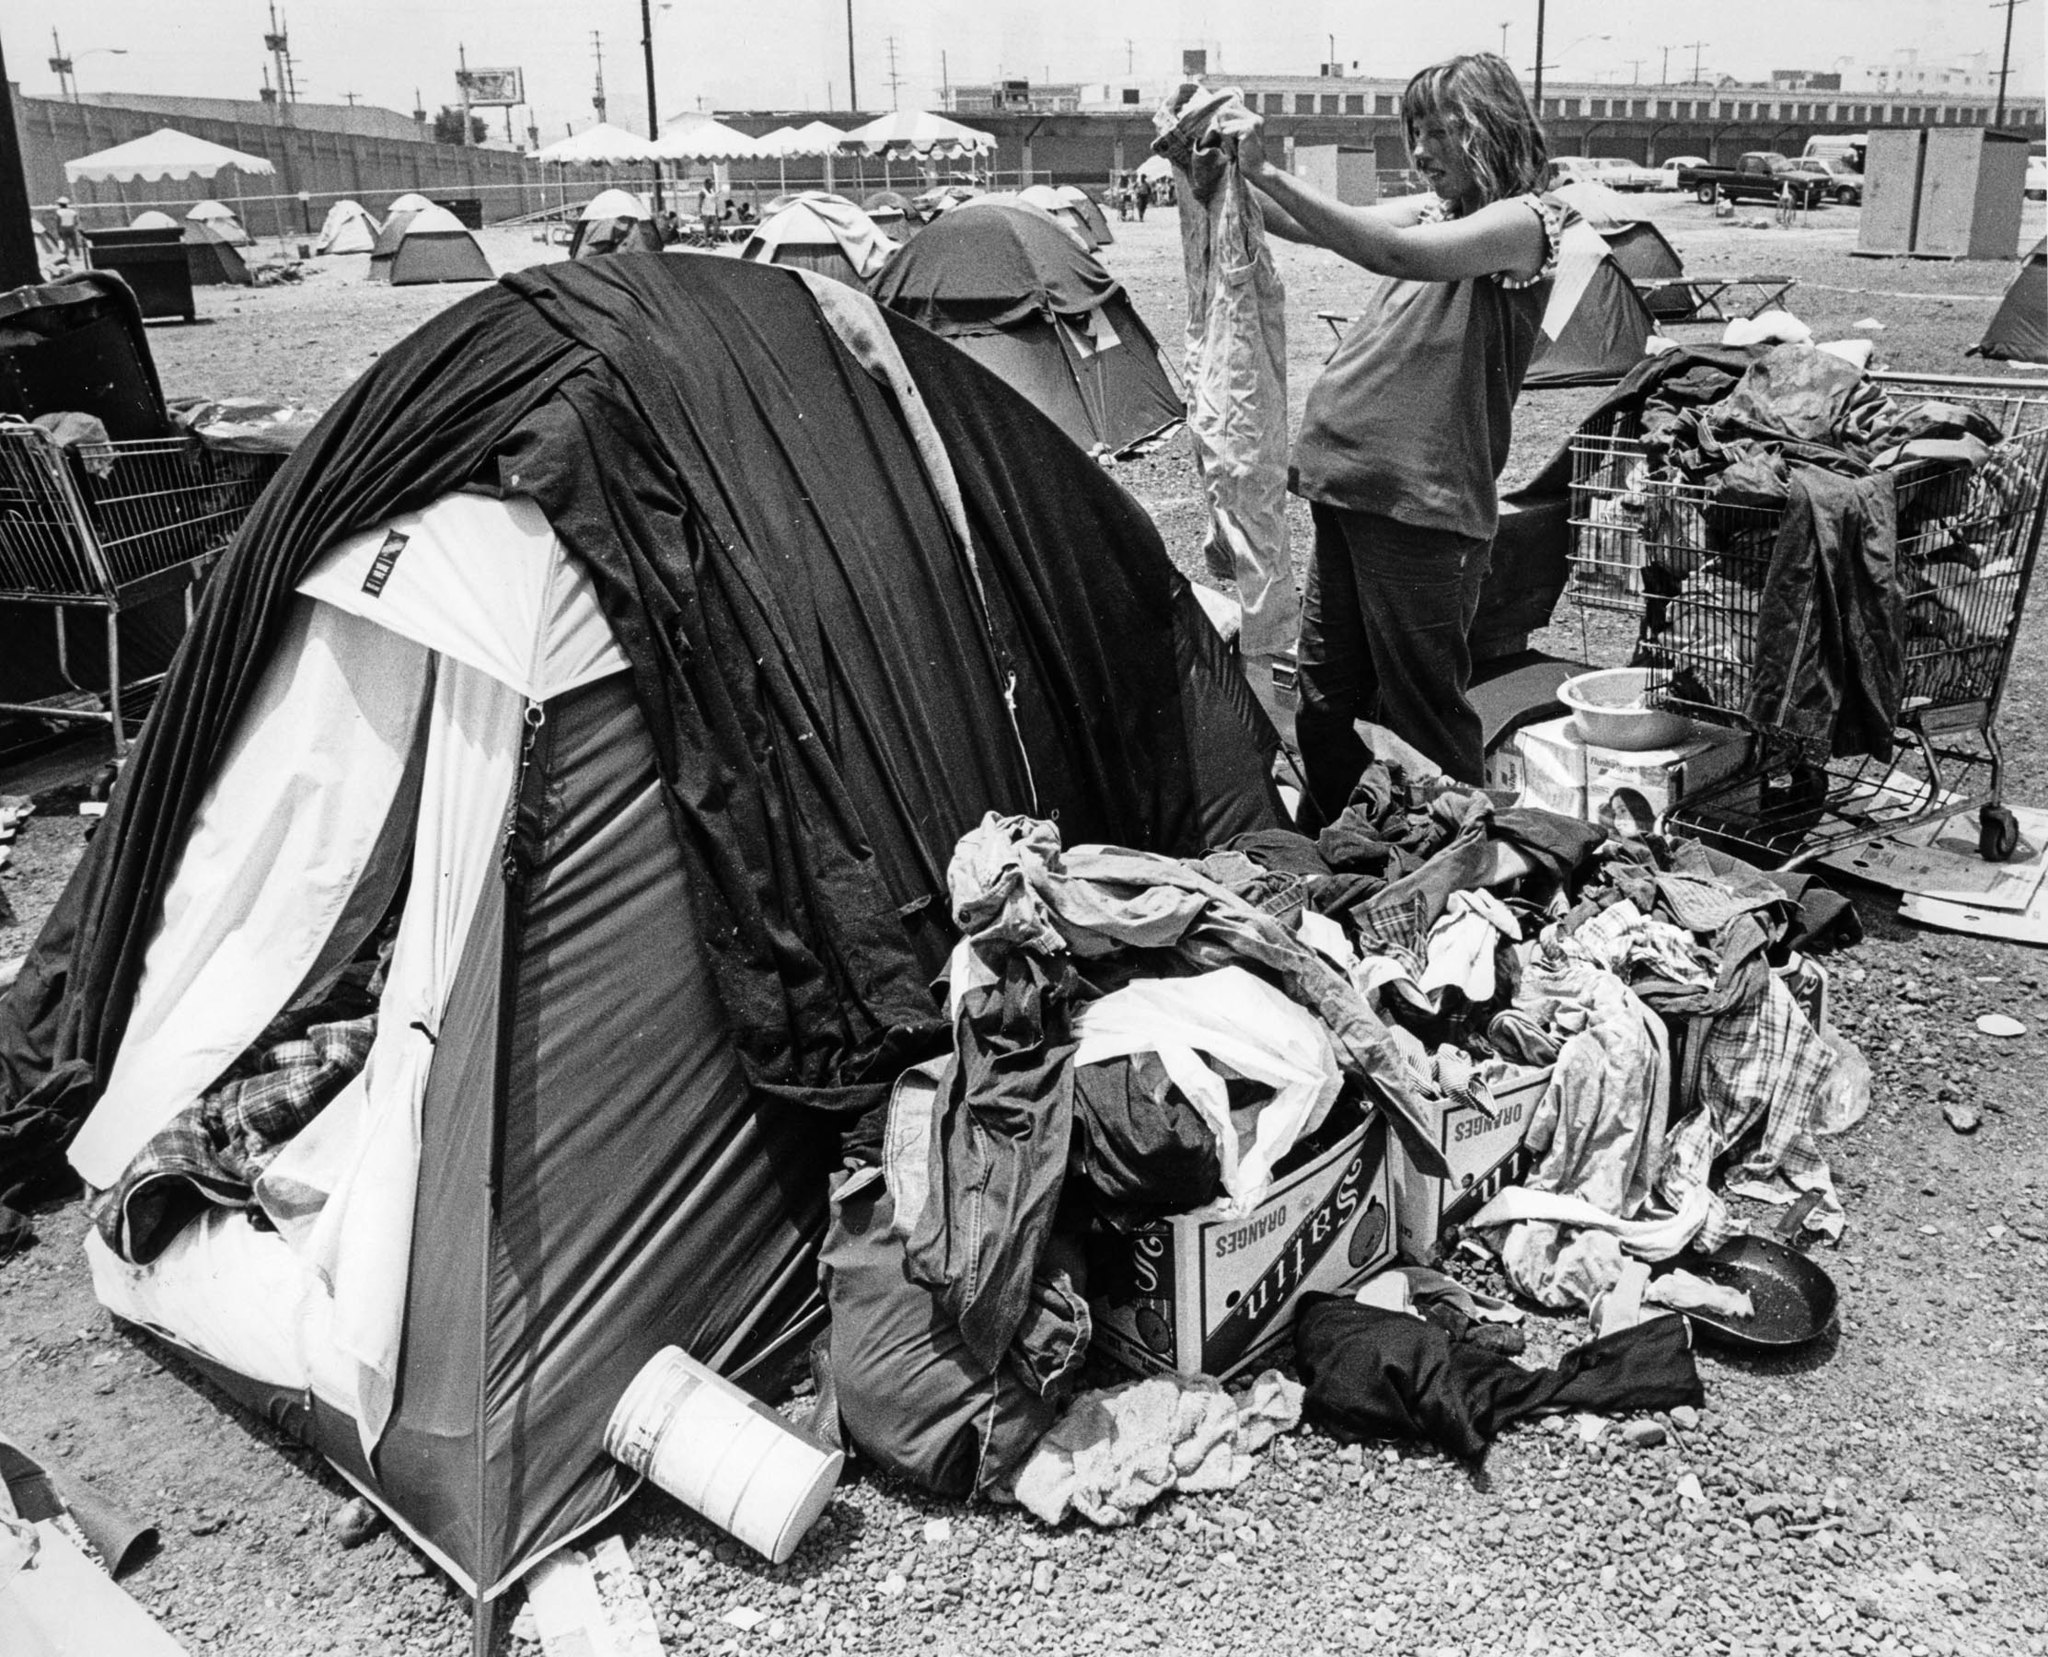 June 26, 1987: Lisa Gillie, 7 months pregnant, sorts clothes outside her tent at the Urban Campgroun